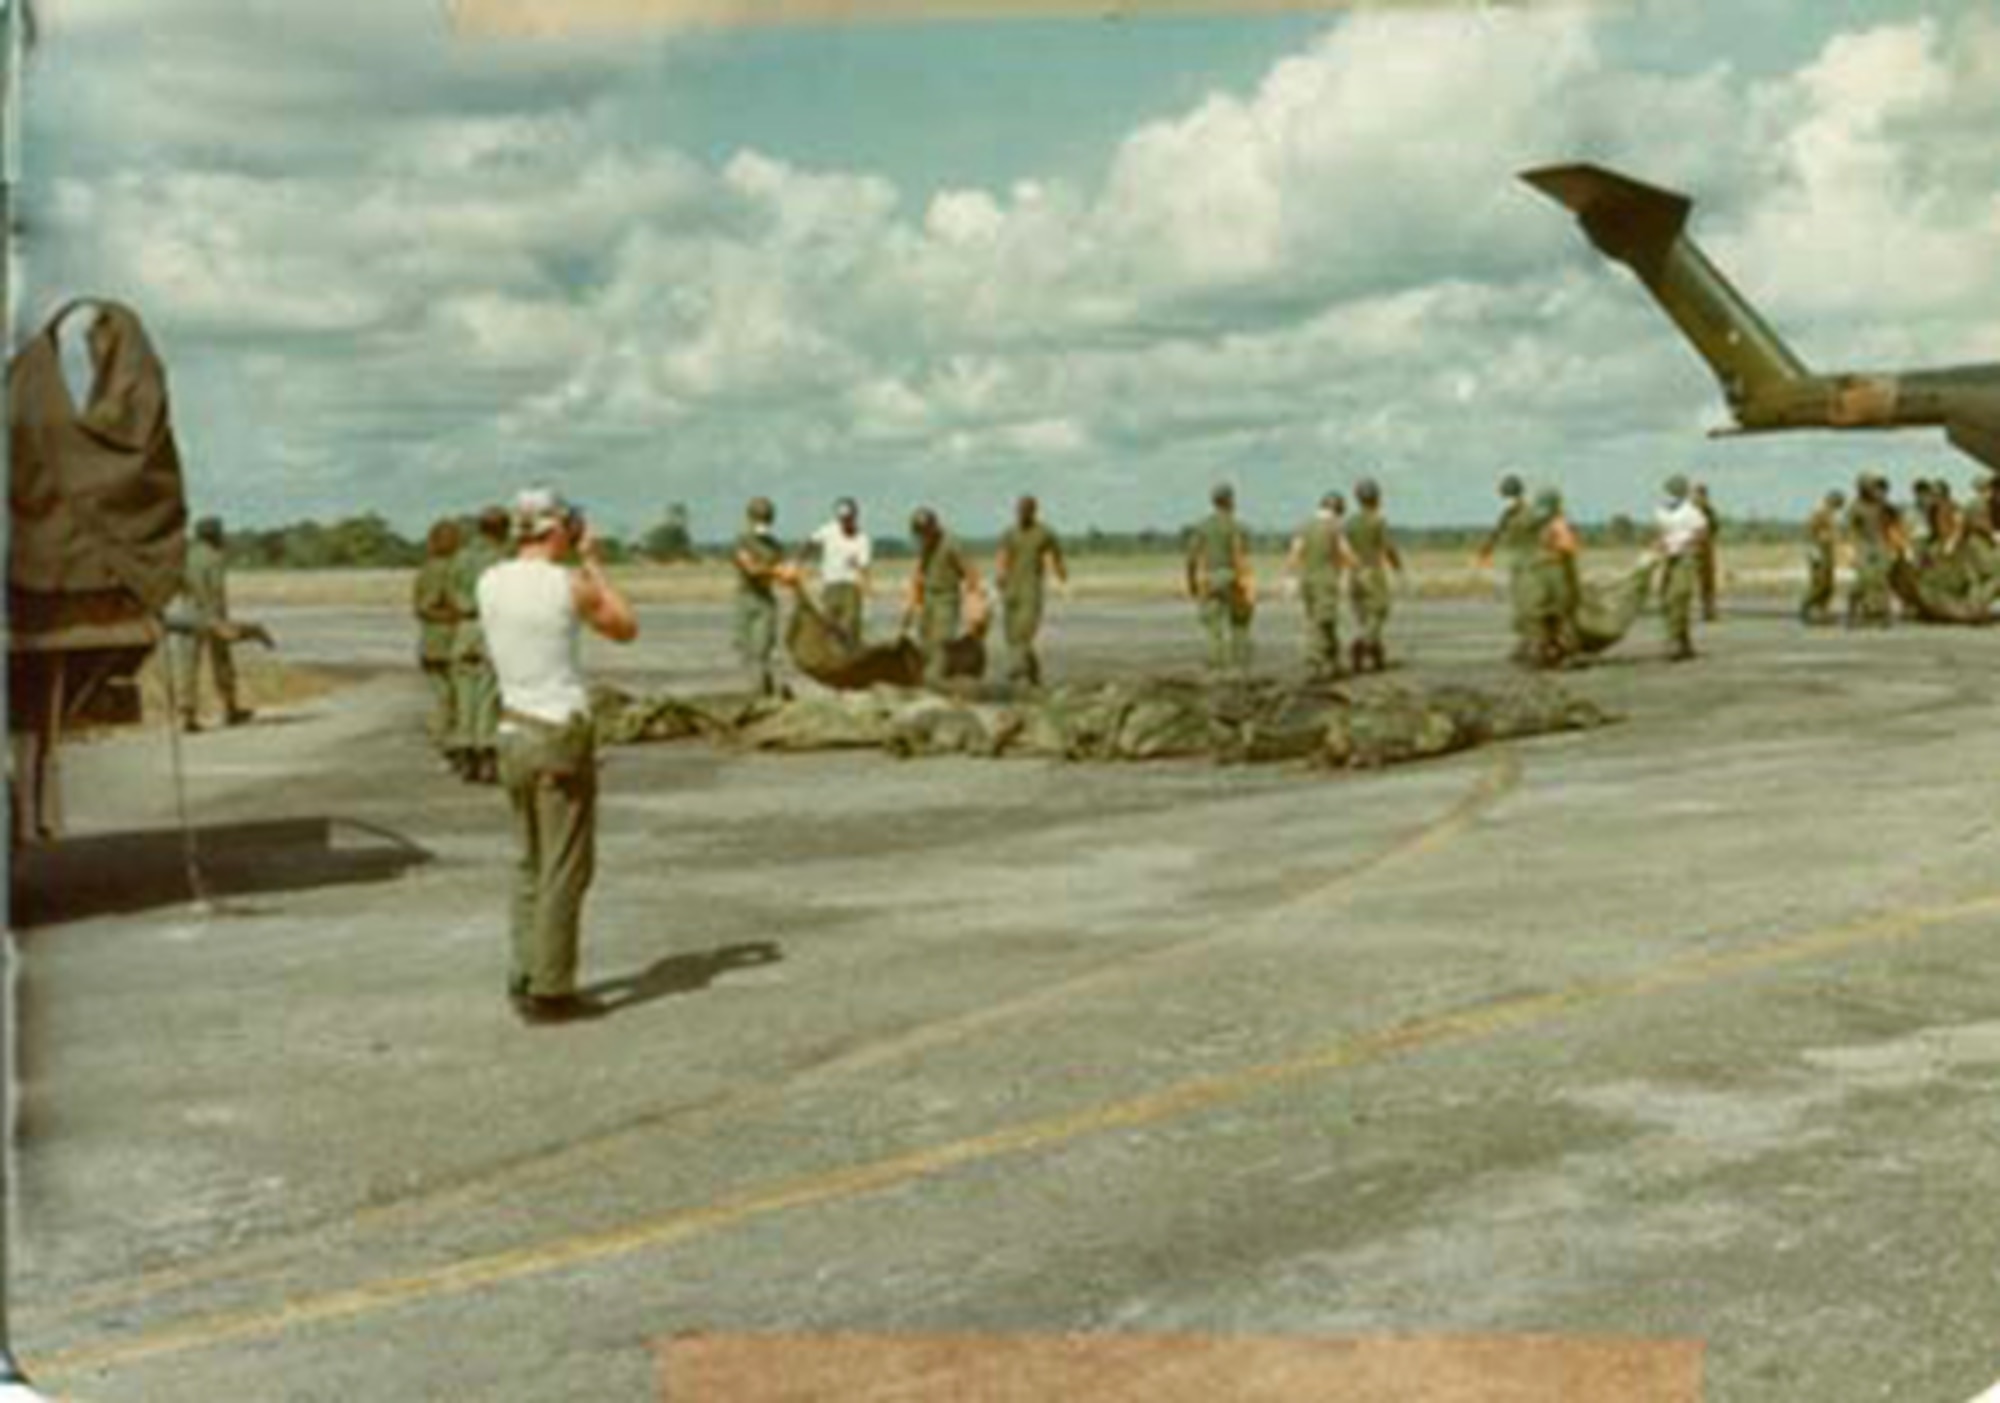 In an operation that began on November 18, 1978, the 31st Aeromedical Evacuation Squadron participated in the treatment and evacuation of personnel from Georgetown, Guyana. These survivors were victims of a mass suicide that had occurred at Jonestown, Guyana on the same date.   (Air Force File Photo)